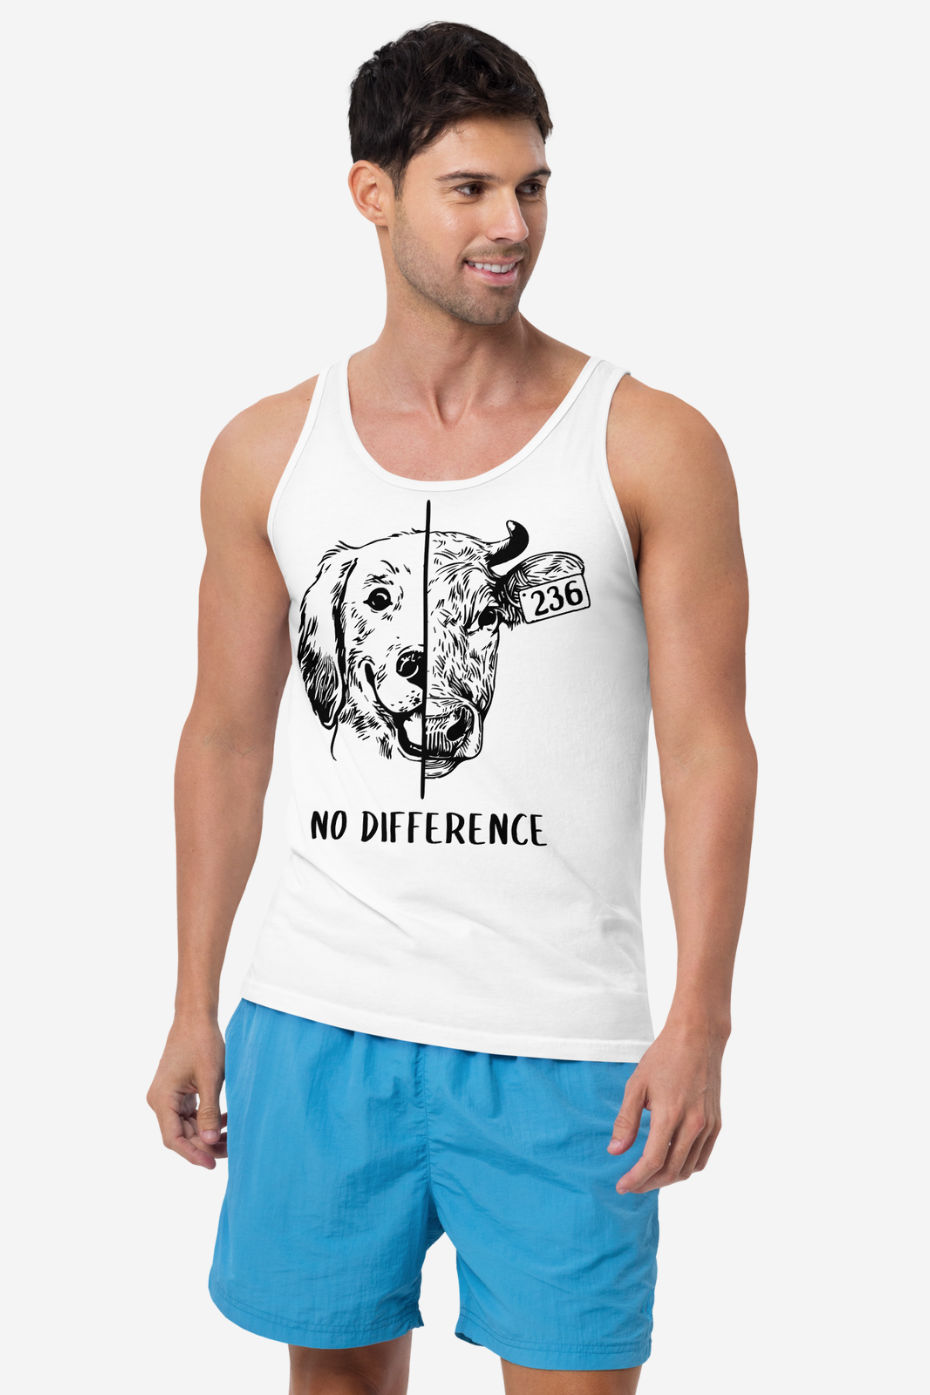 No Difference Unisex Tank Top